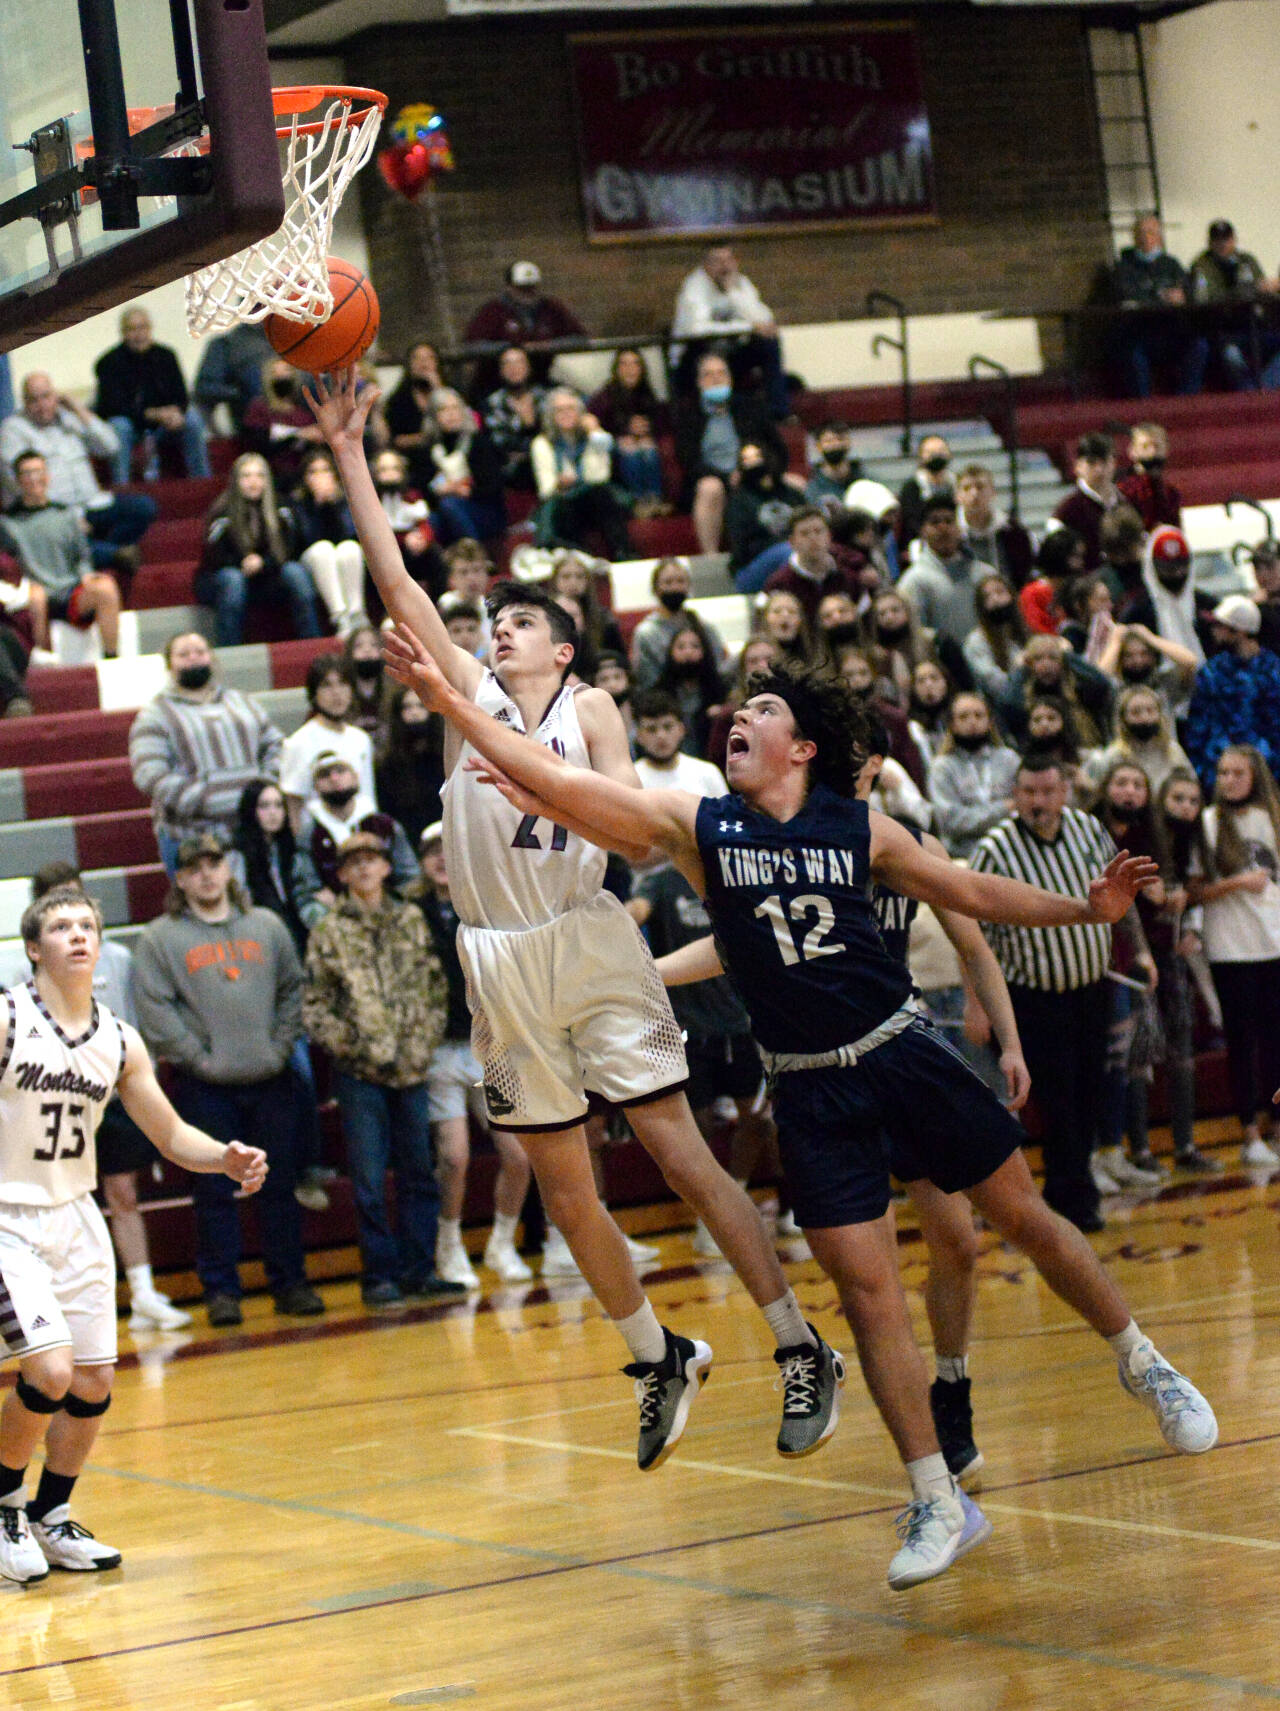 RYAN SPARKS | THE DAILY WORLD
Montesano's Christian Olsen shoots while being defended by King's Way Christian's Isaac Pisarczyk during the Bulldogs 62-30 loss on Friday in Montesano.